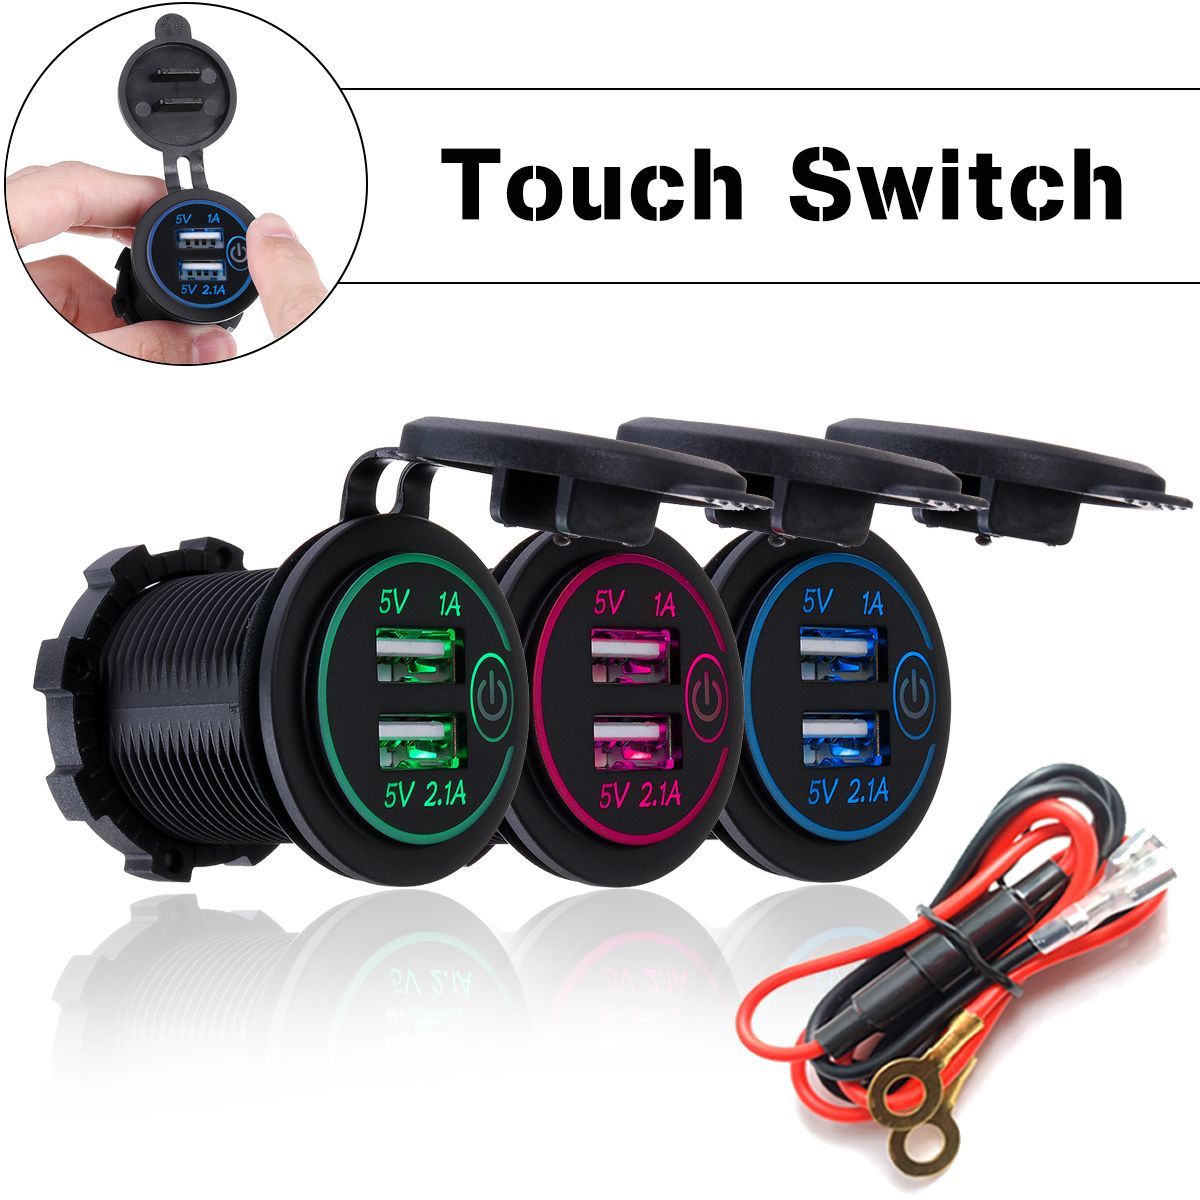 P8-S-Touch-Switch-with-Power-Cord-21A1A-Dual-USB-Car-Motorized-Modified-Charger-Phone-12-24V-1534306